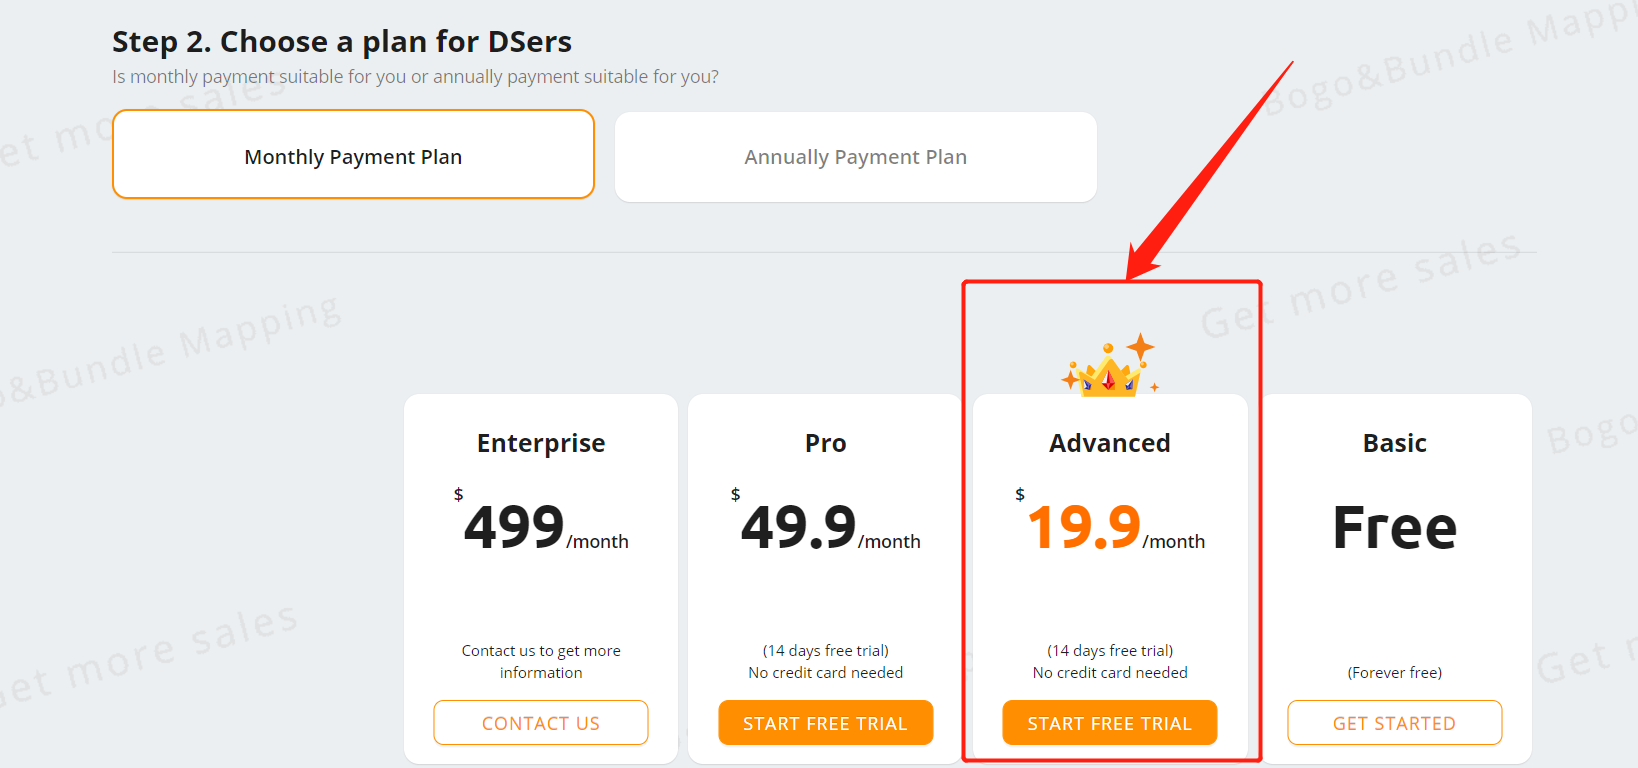 Link your Shopify store - Step 2. Choose a plan for DSers - DSers